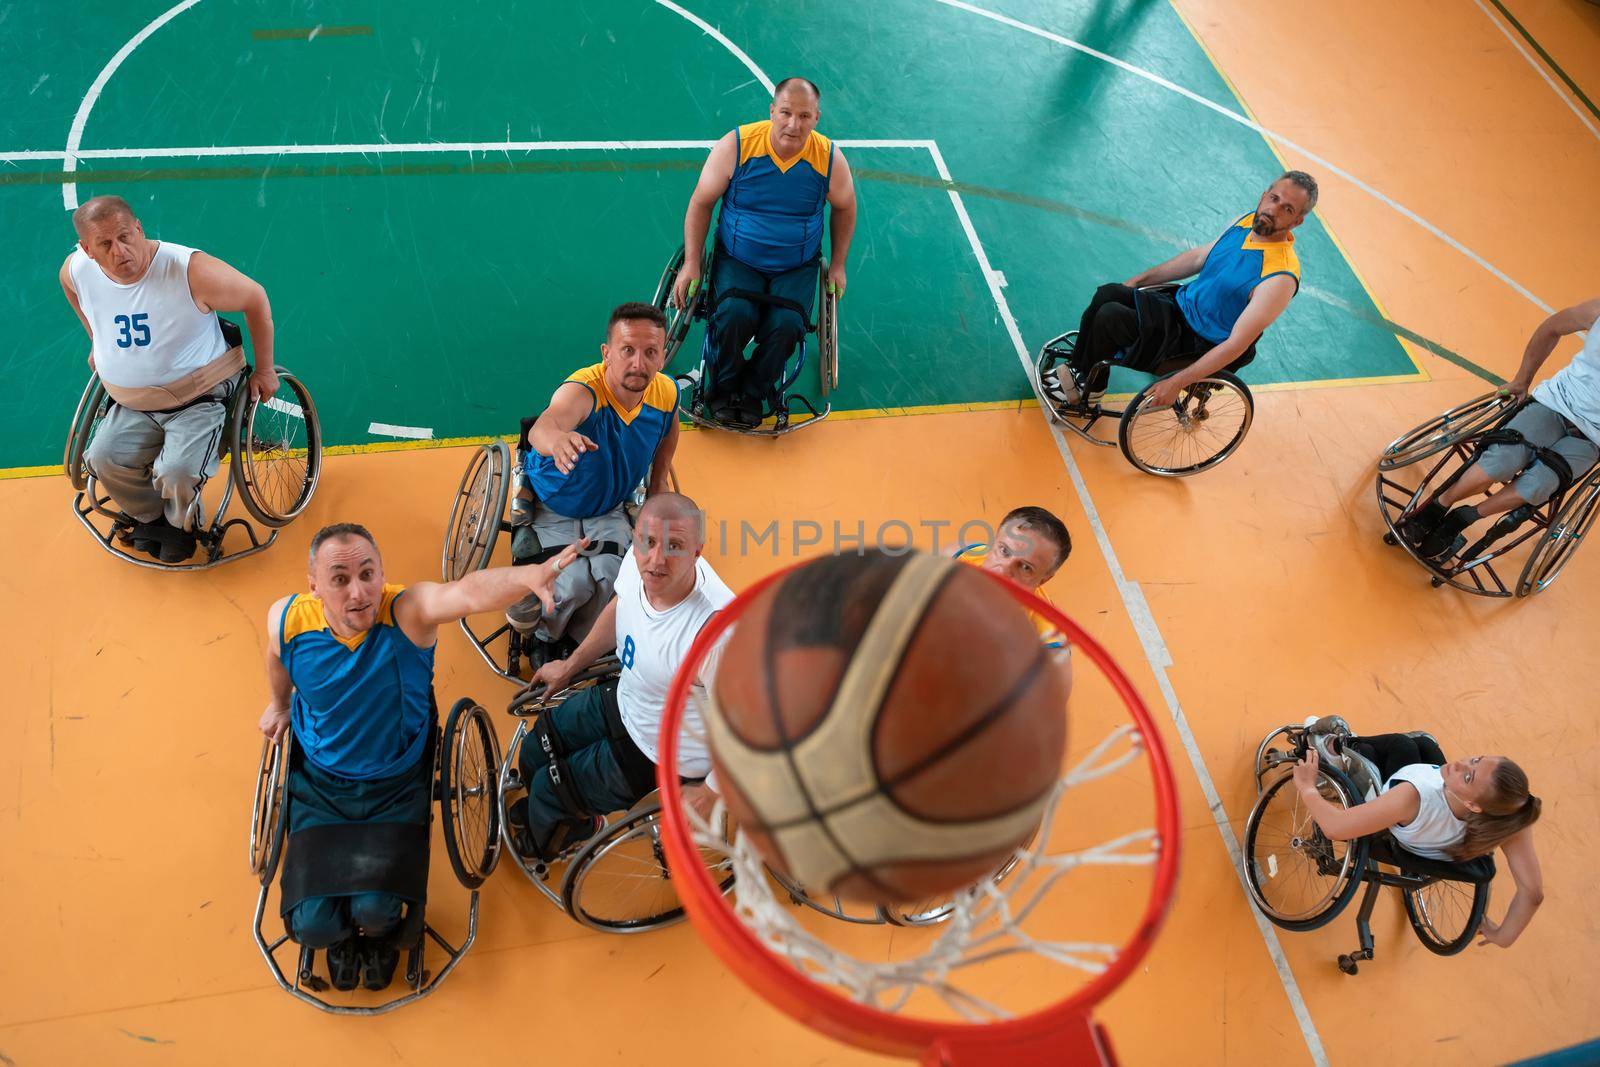 Disabled War or work veterans mixed race and age basketball teams in wheelchairs playing a training match in a sports gym hall. Handicapped people rehabilitation and inclusion concept. Top view.